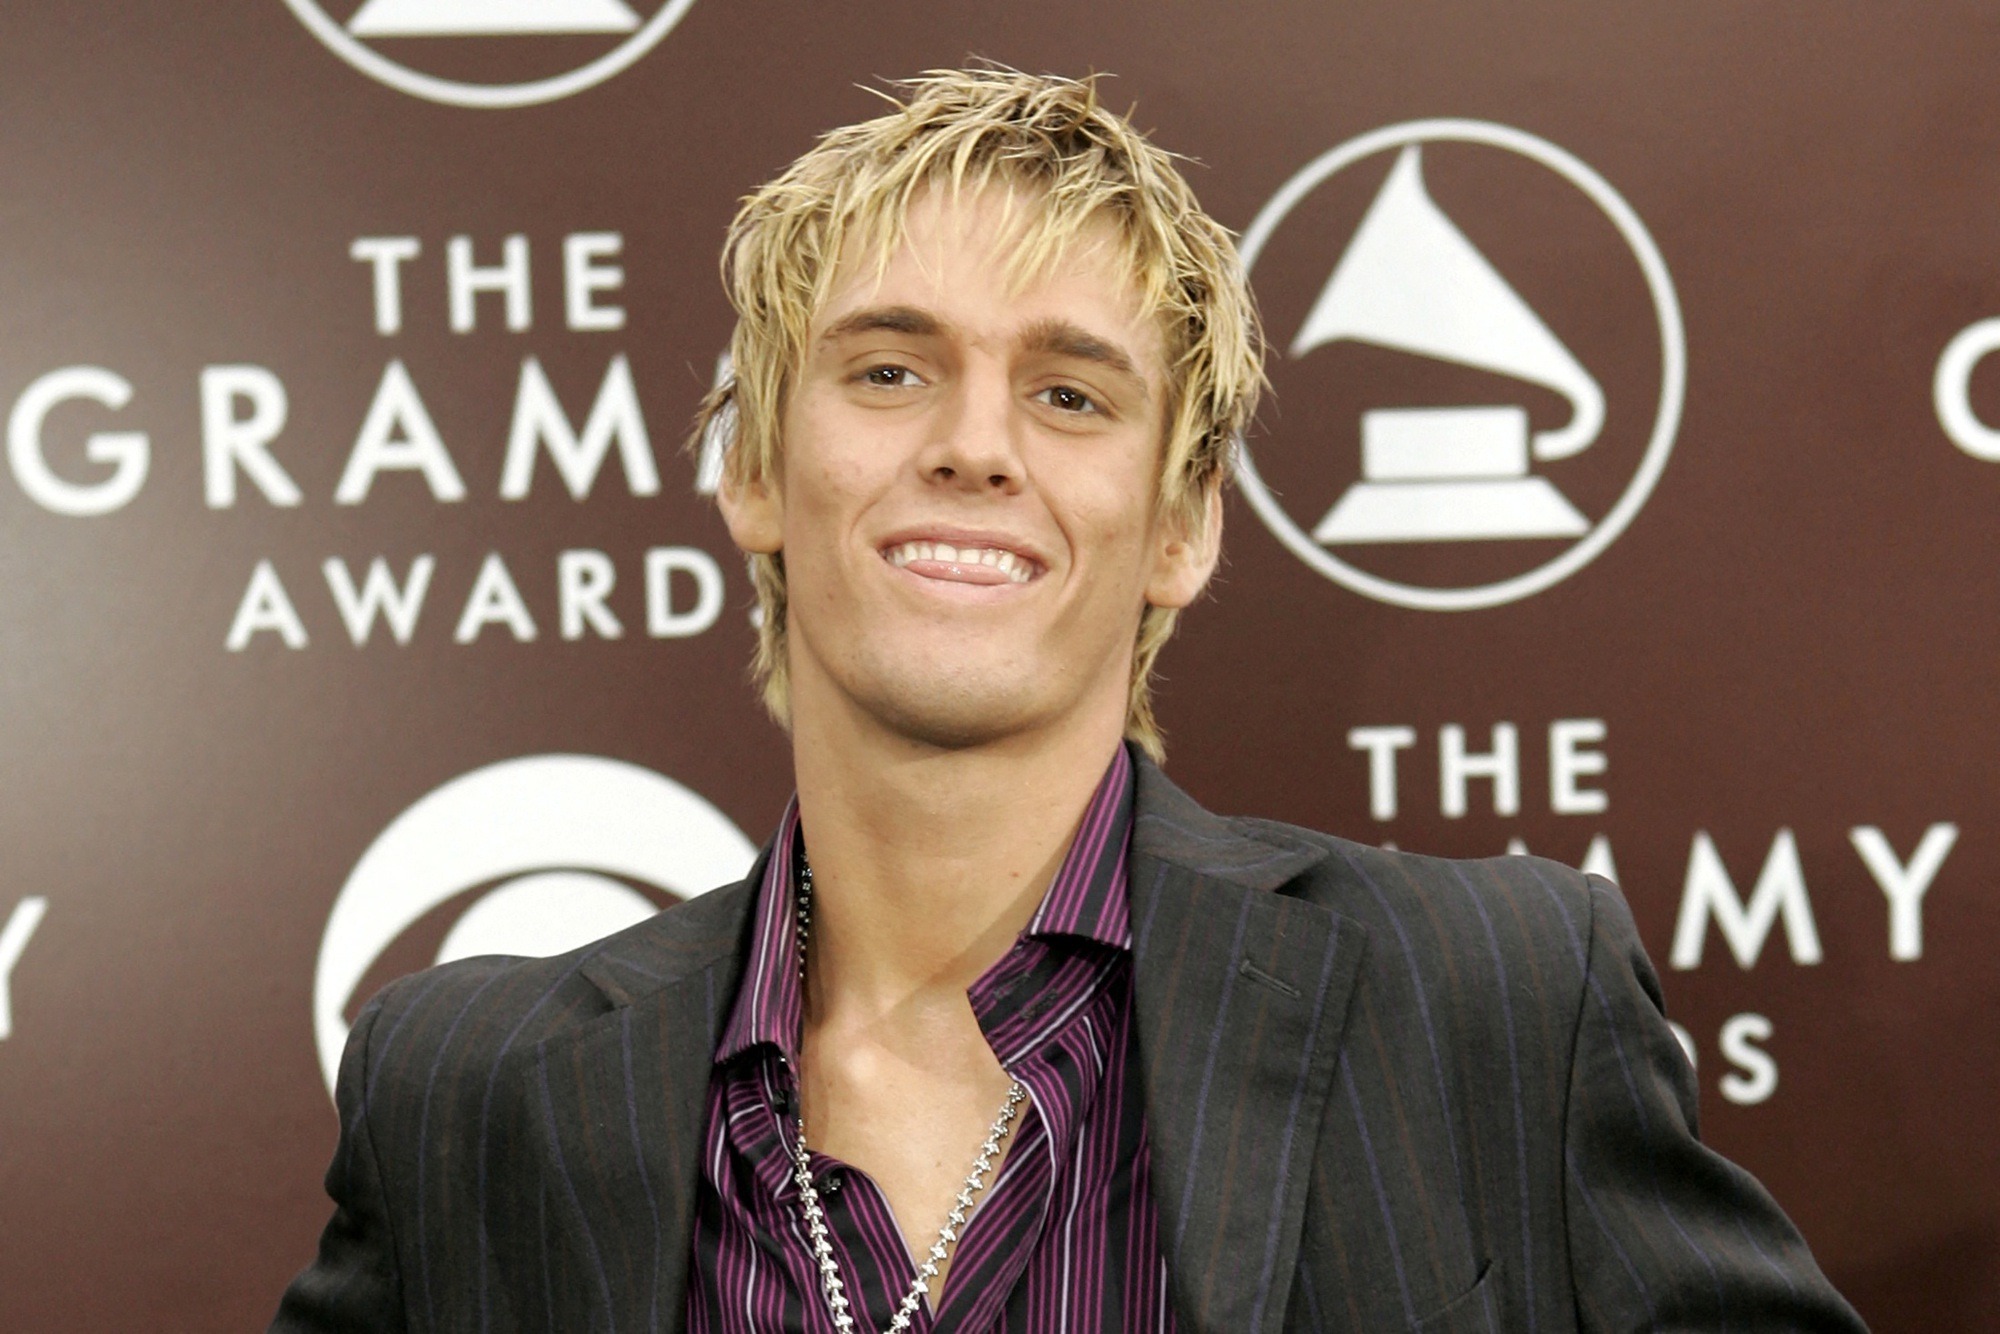 Remembering Aaron Carter A look back at a well-known star from the 2000s (2)